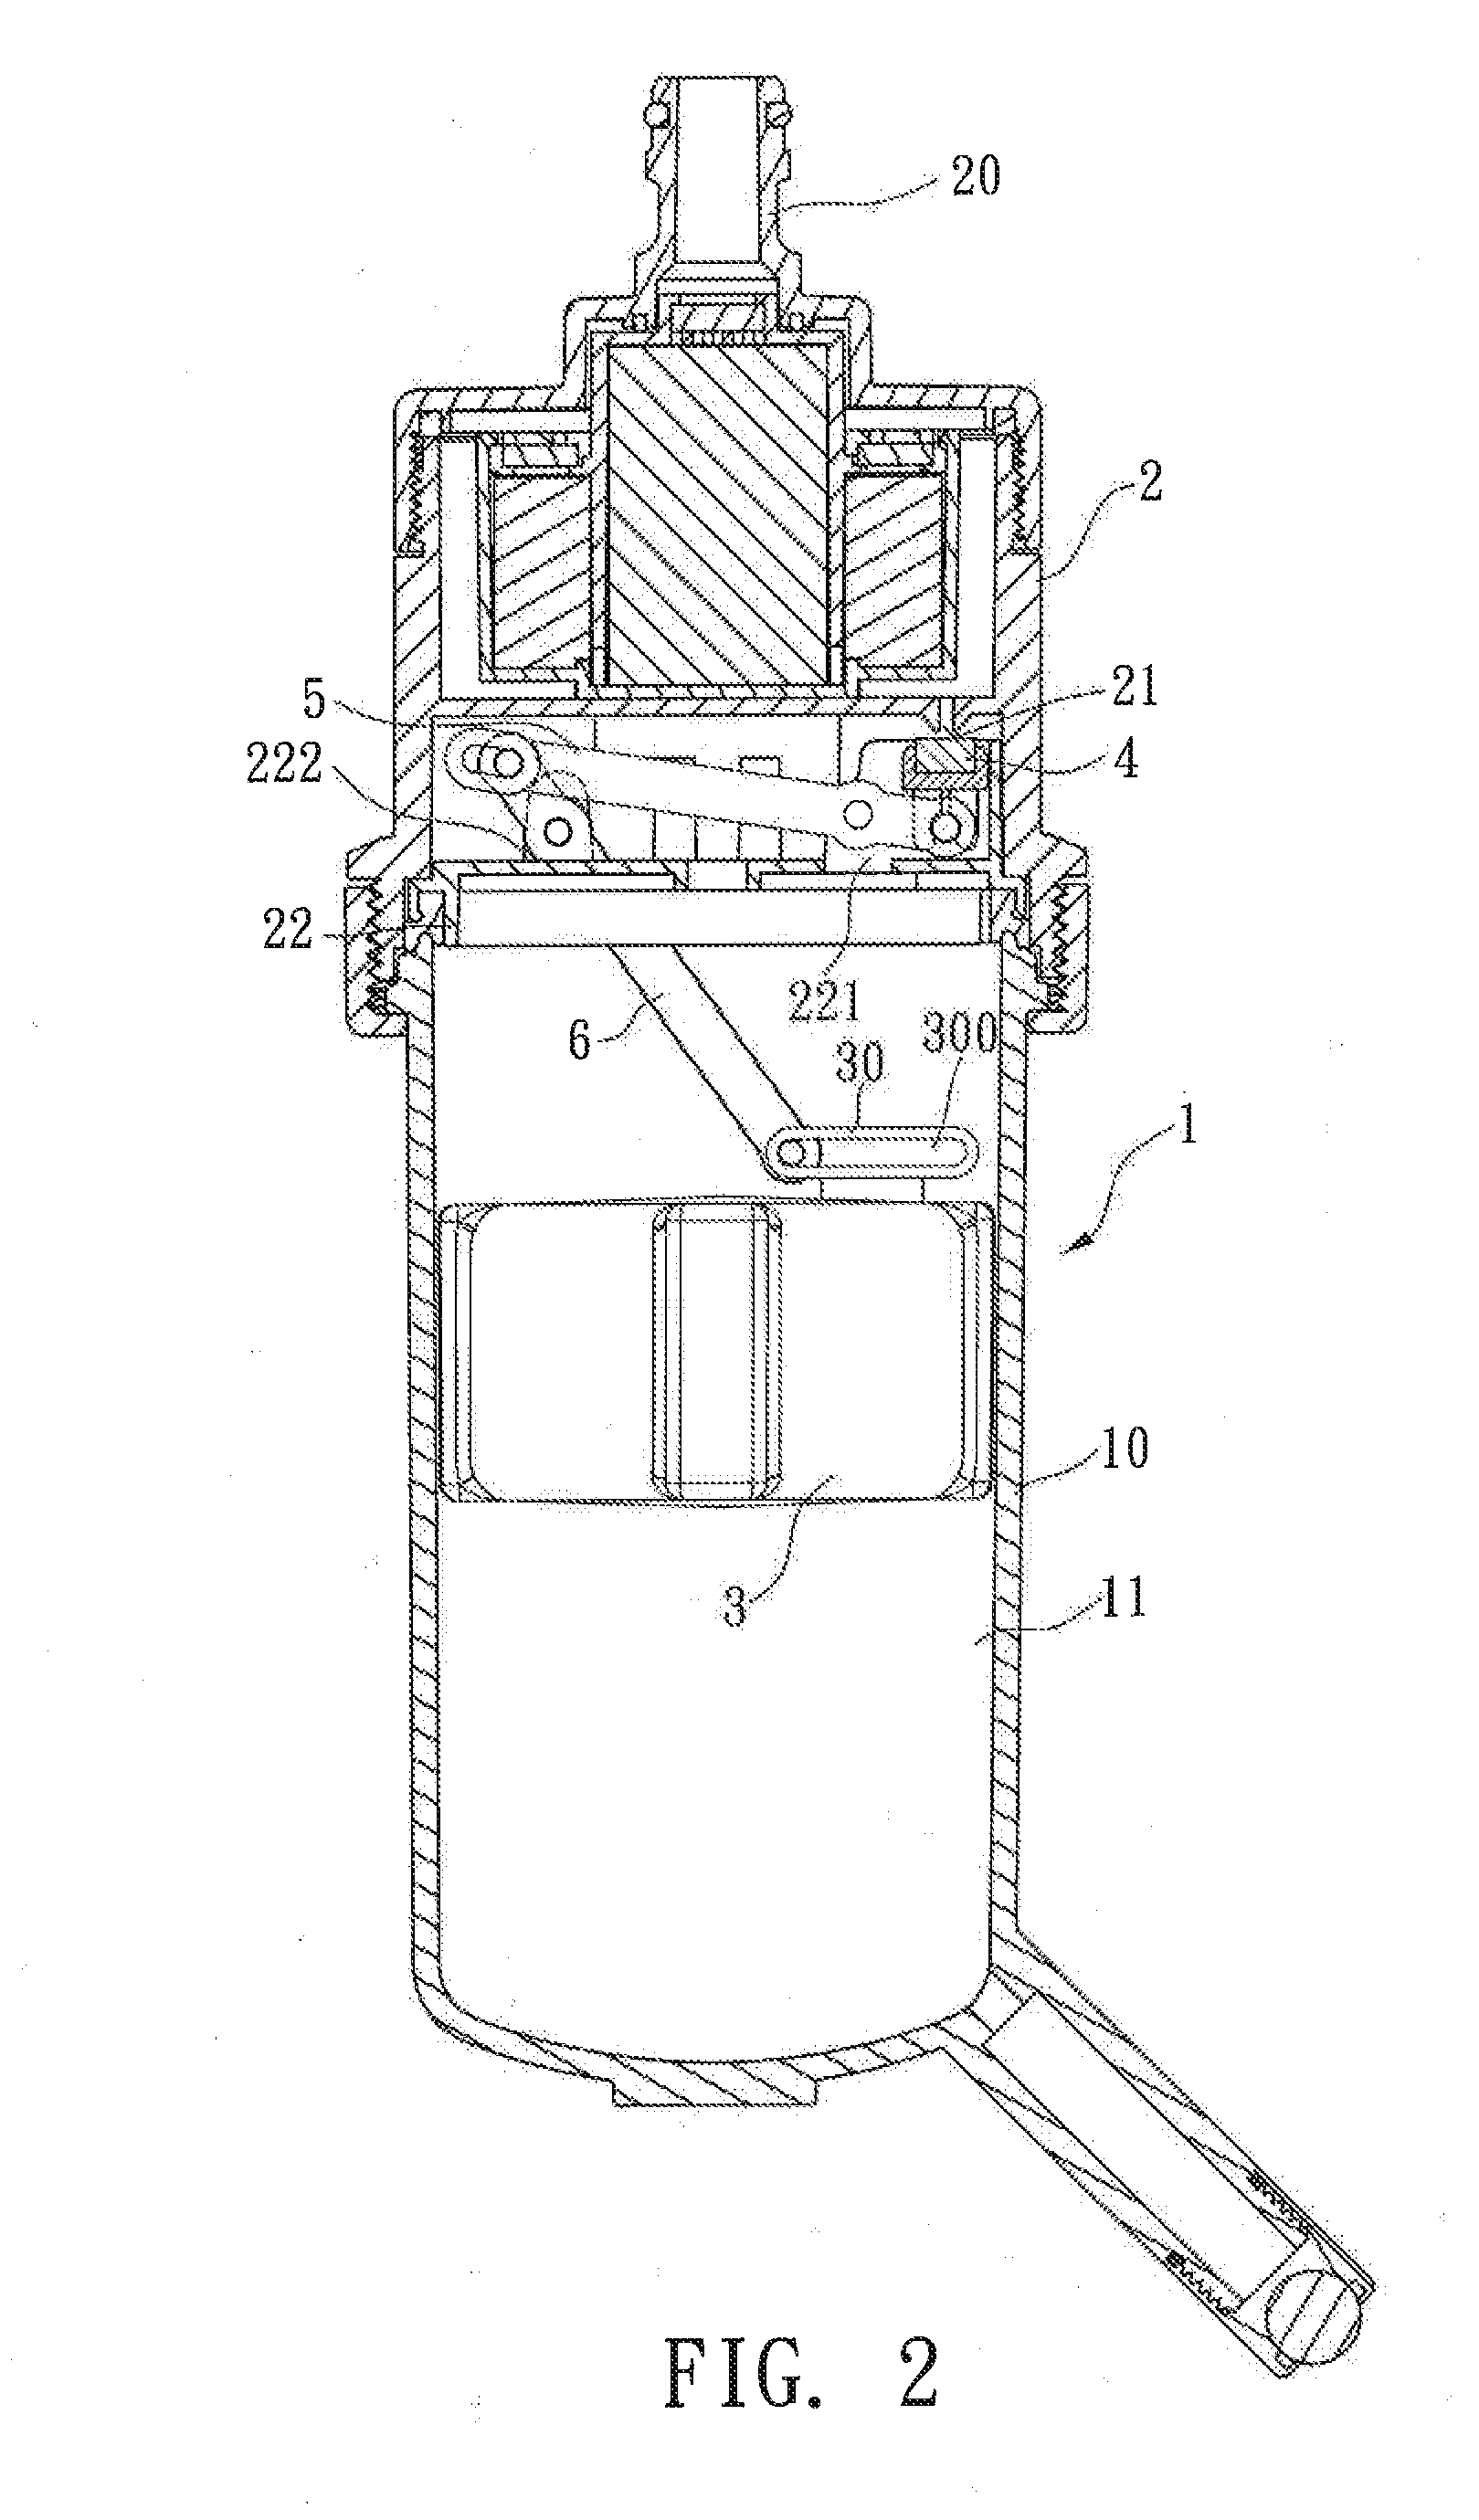 Auto water replenishing mechanism of the pet drinking fountain